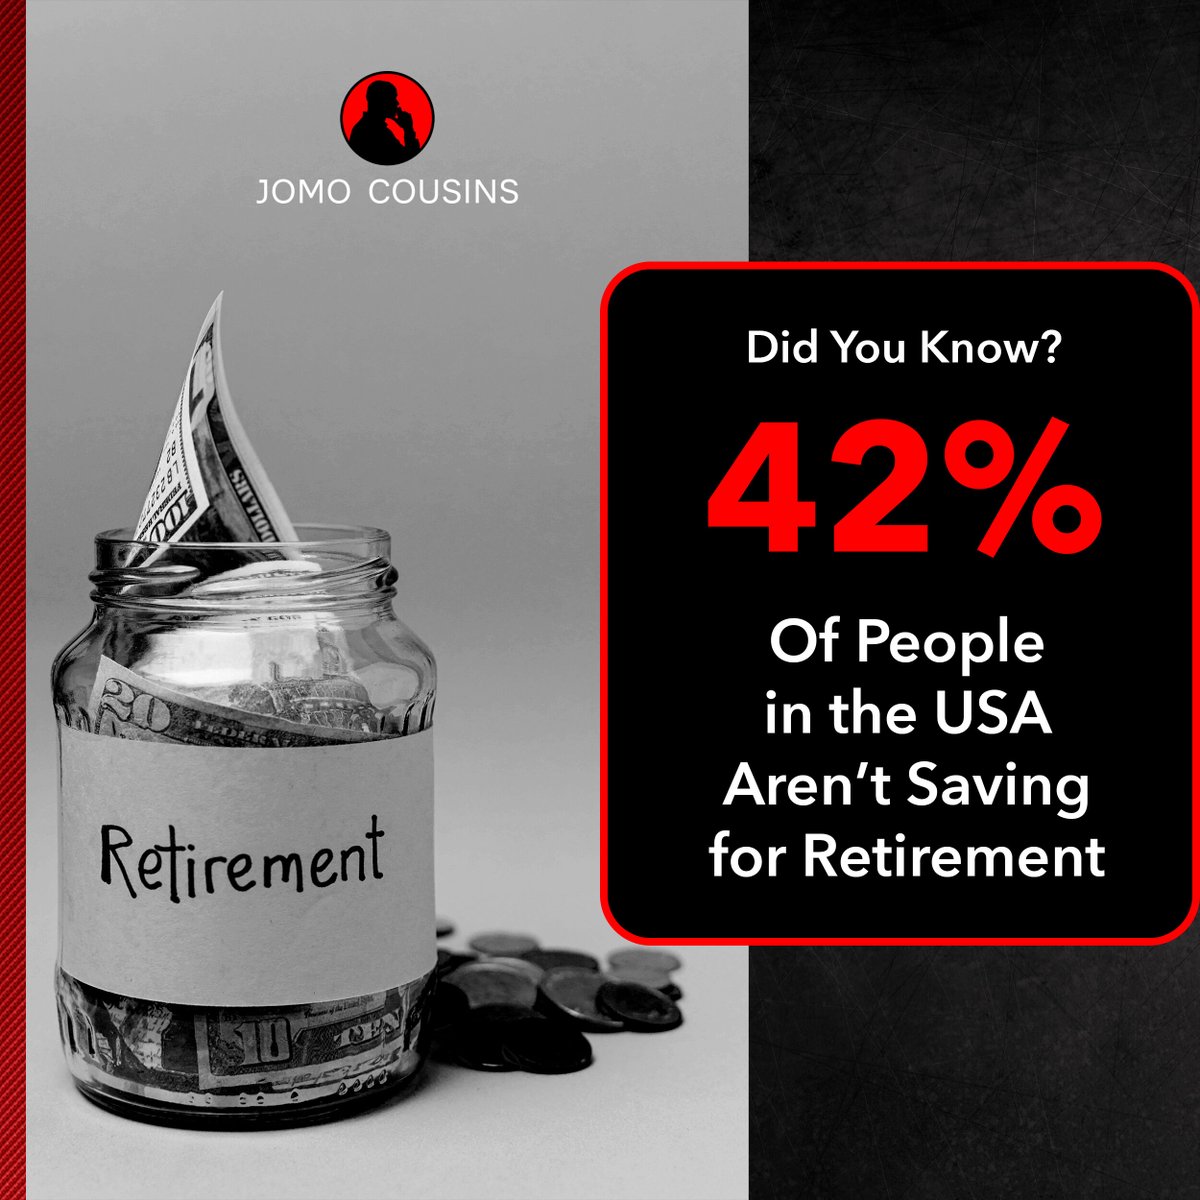 Shocking stat: Only 58% of adults save for retirement, and just 10% save recommended 15% of income. Break the cycle of dangerous financial decisions. 

#SecureYourFuture #InvestInYourFuture #FinanceGoals #RetirementGoals #FinancialLiteracy #FinancialFuture #JomoCousins